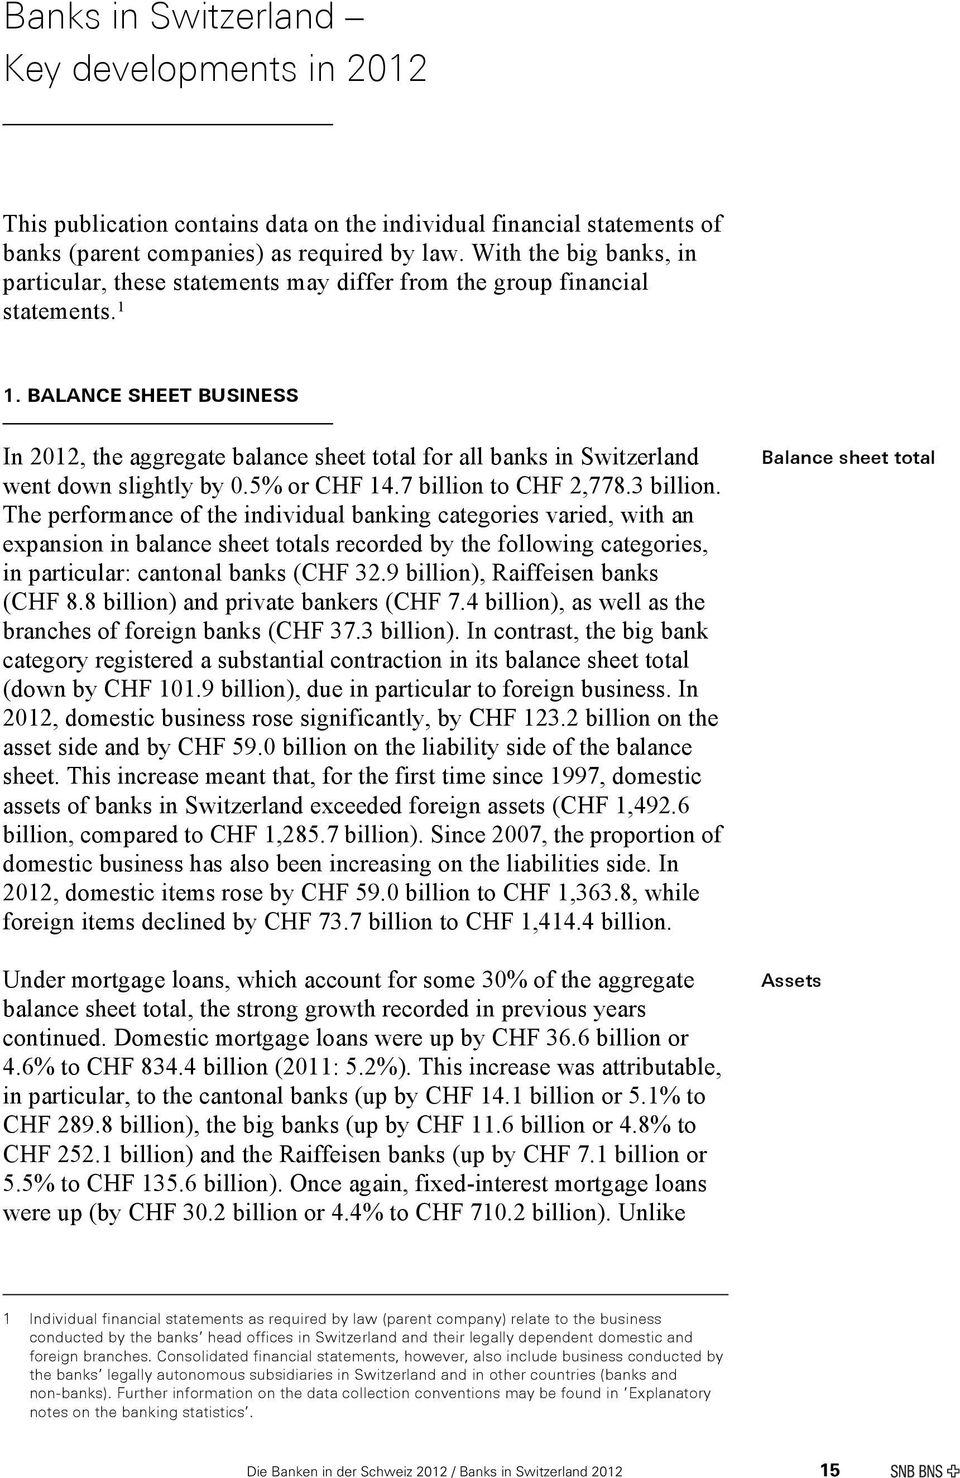 BALANCE SHEET BUSINESS In 2012, the aggregate balance sheet total for all banks in Switzerland went down slightly by 0.5% or CHF 14.7 billion to CHF 2,778.3 billion.